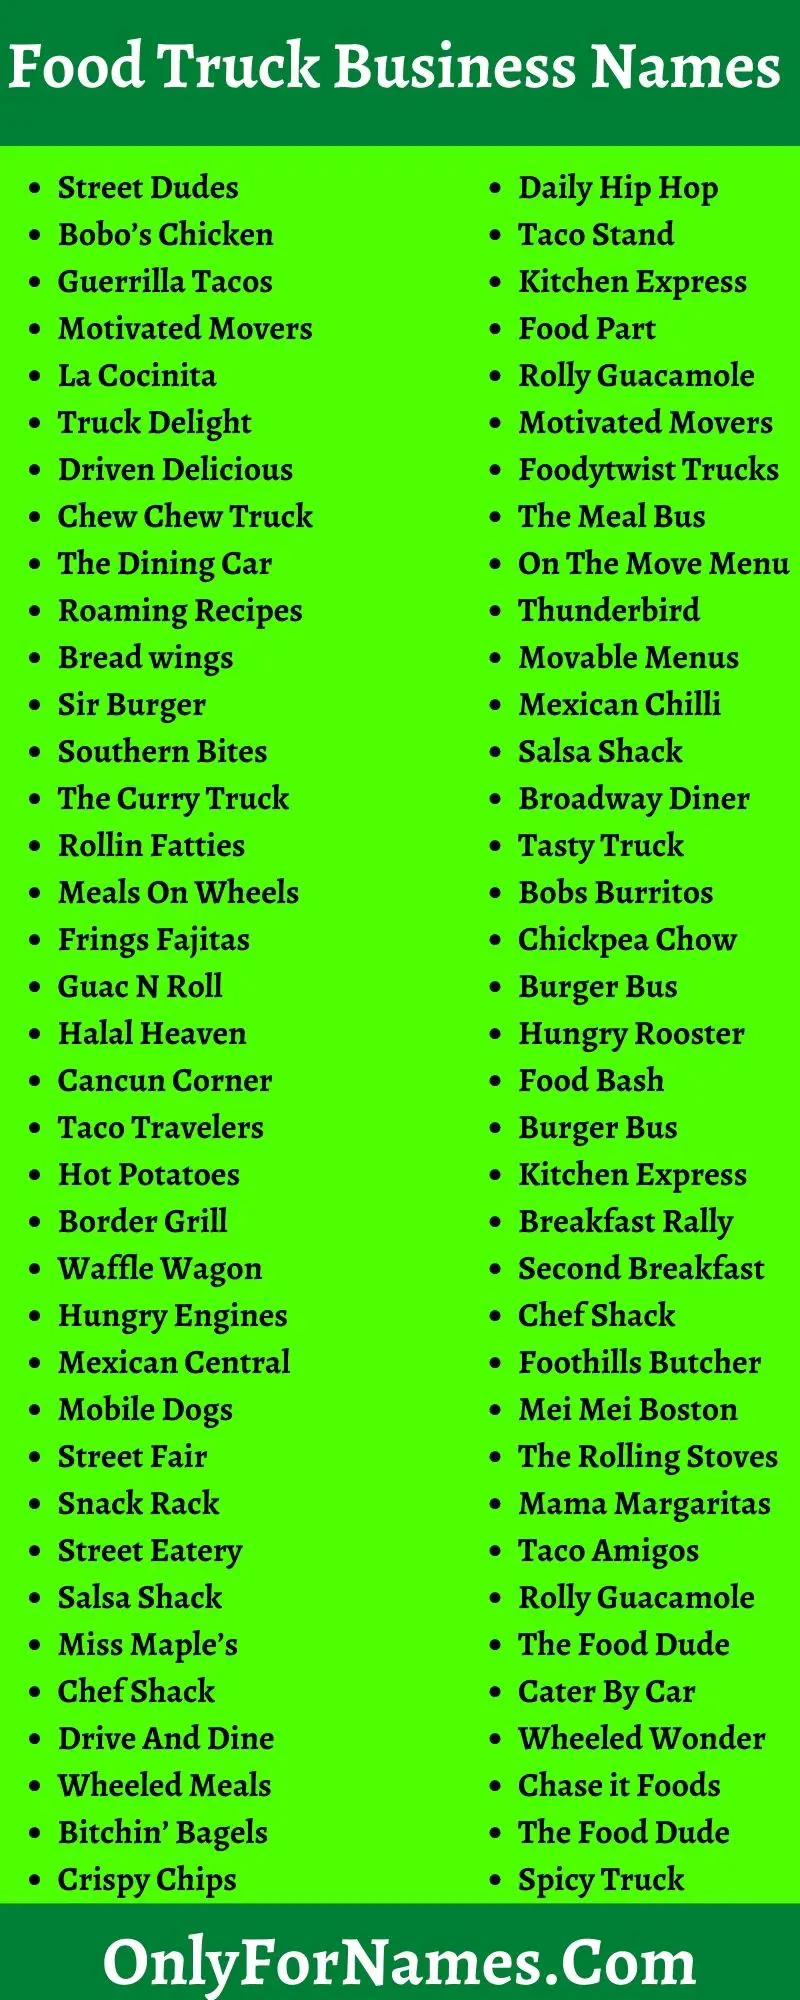 Food Truck Business Names